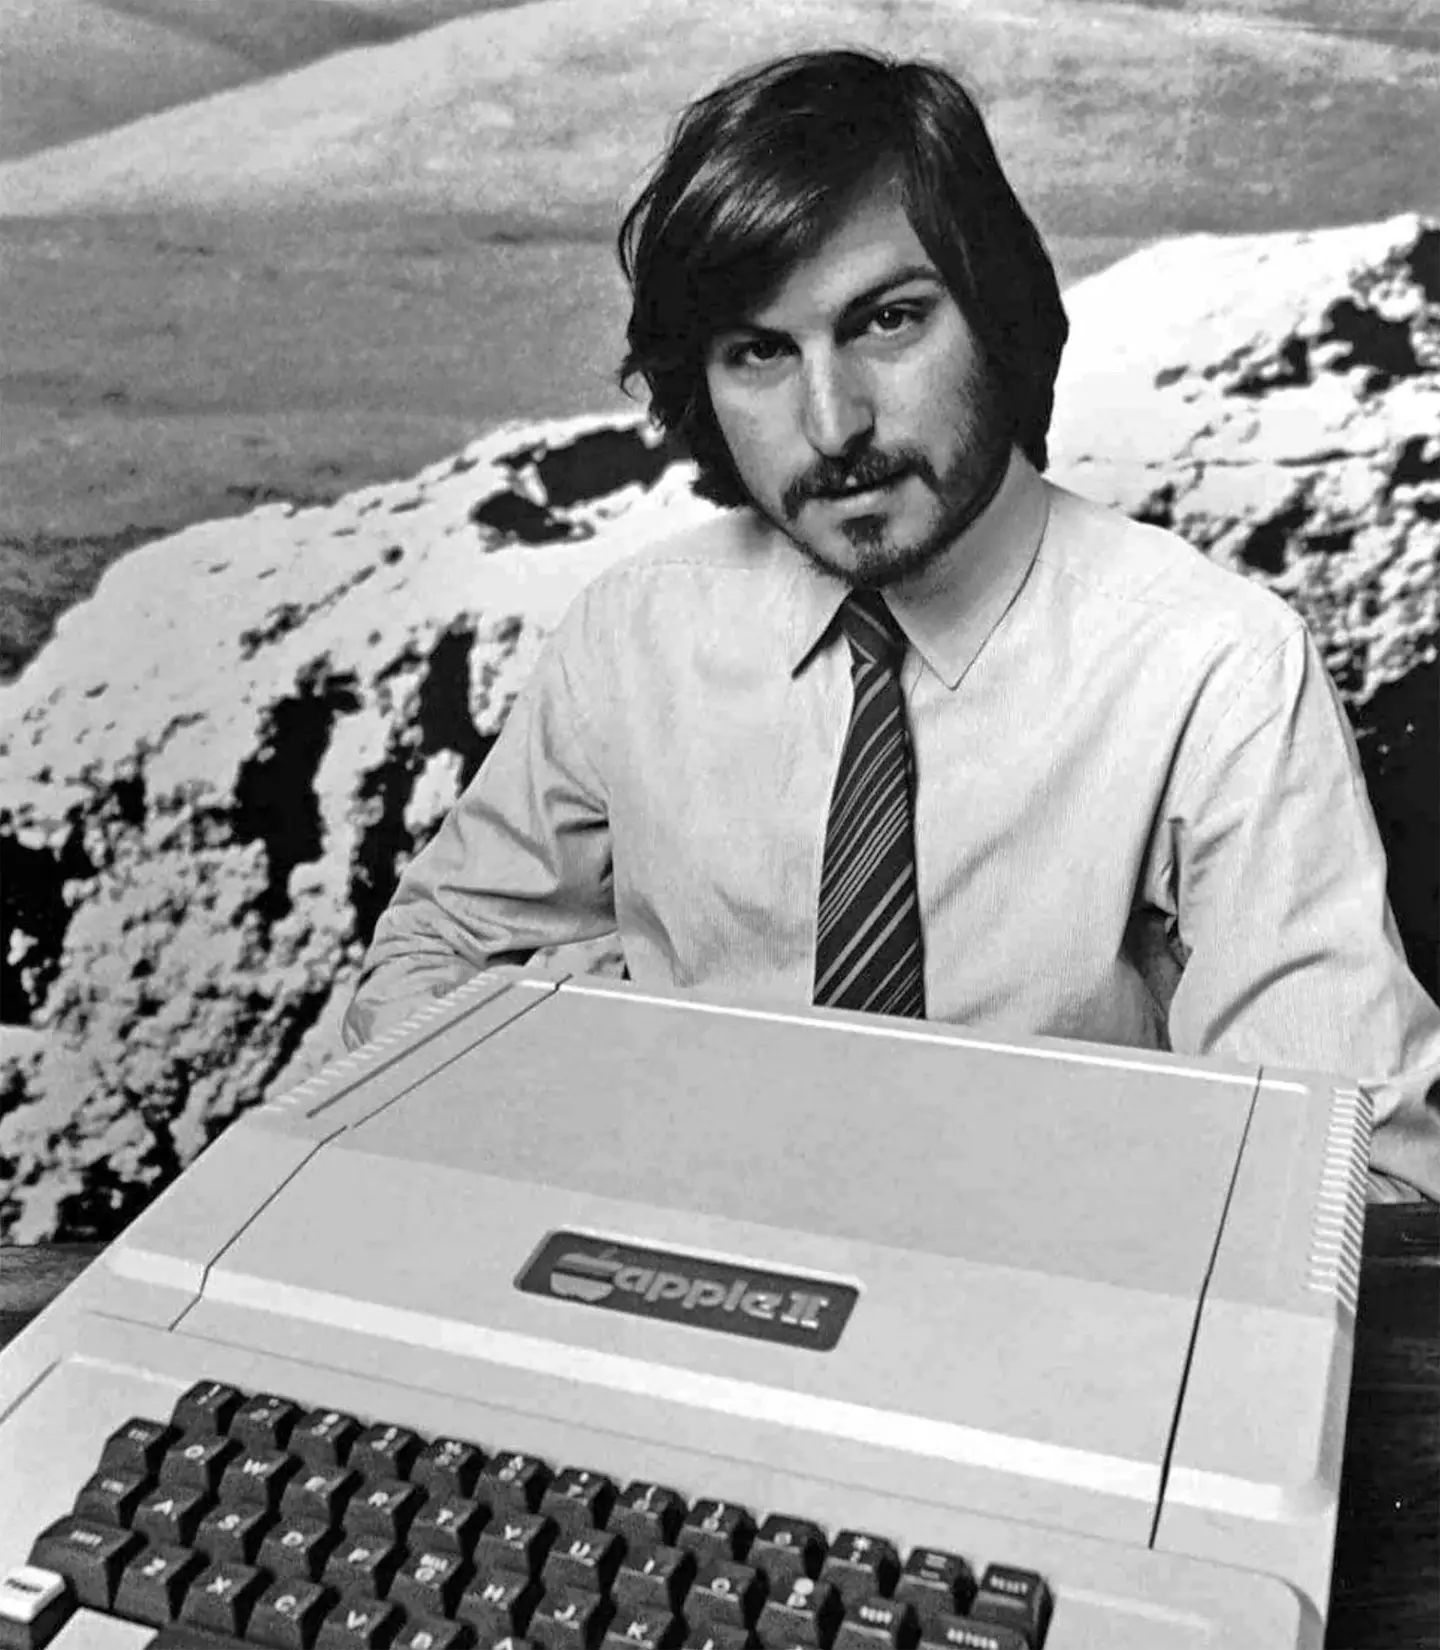 Steve Jobs apparently was a 'pain to work with' during his time at Atari.